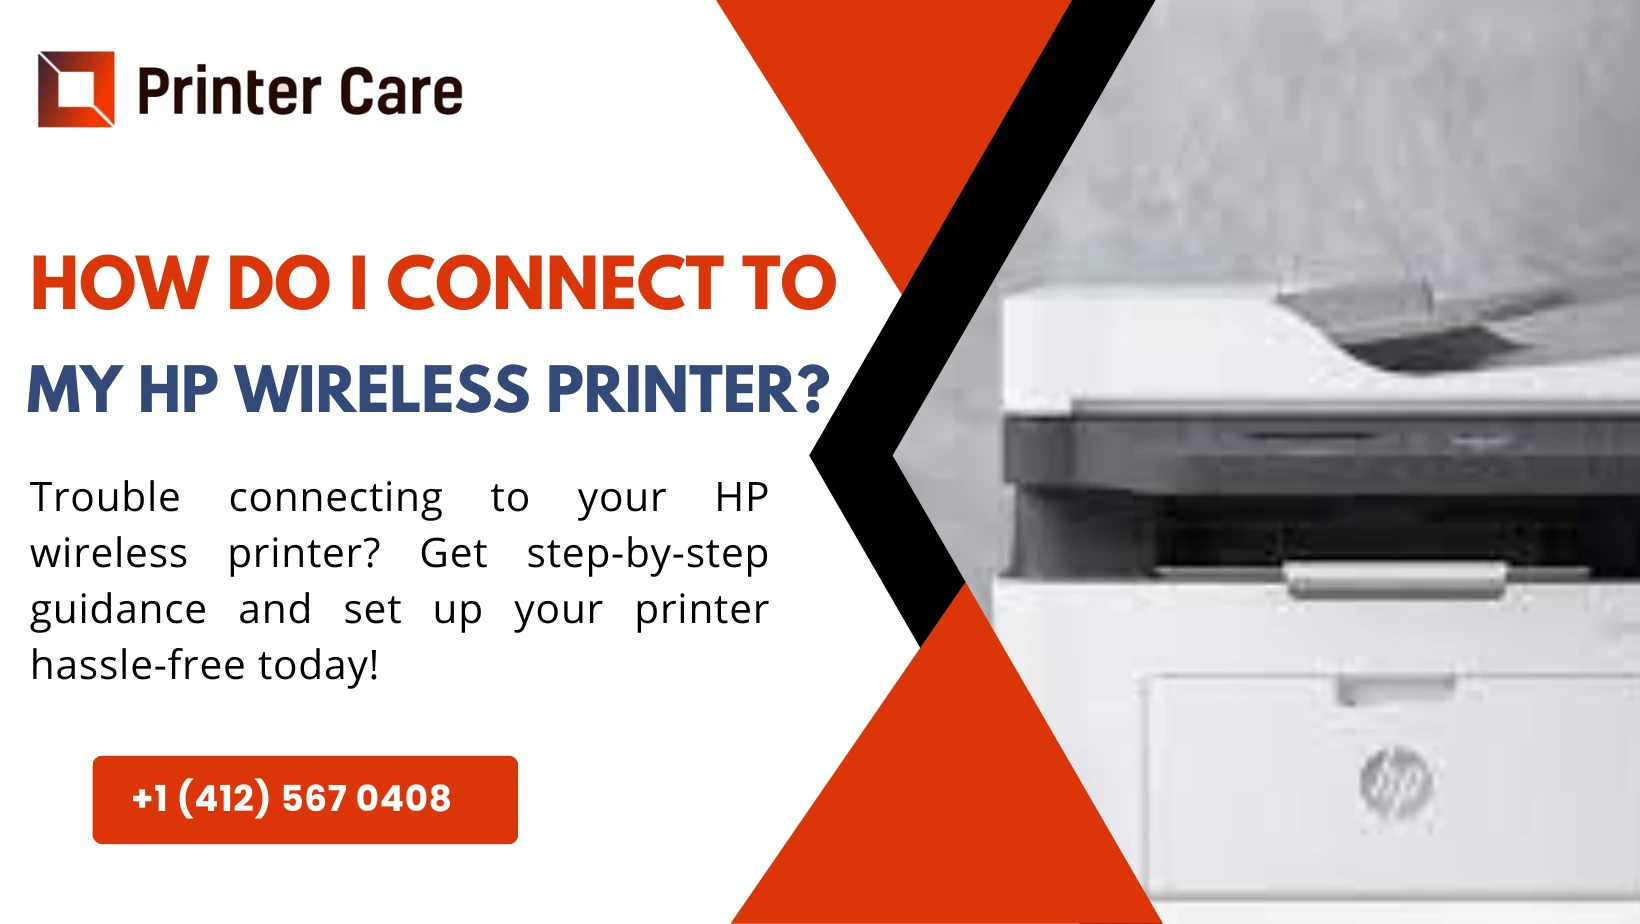 How do I connect to my HP wireless printer